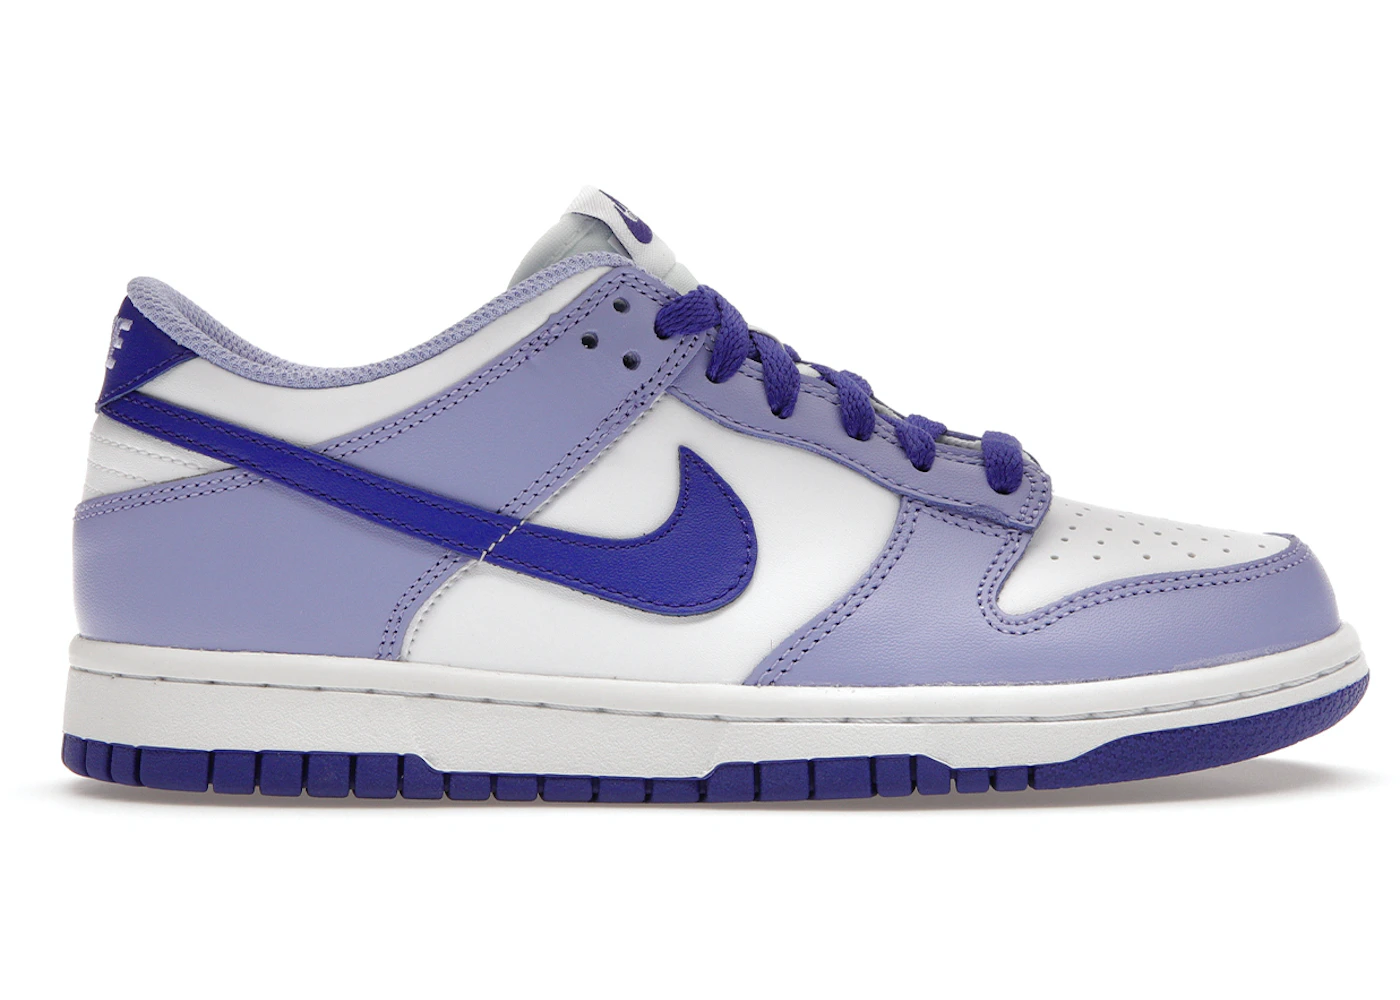 Nike to Release SB Dunk Low Blueberry